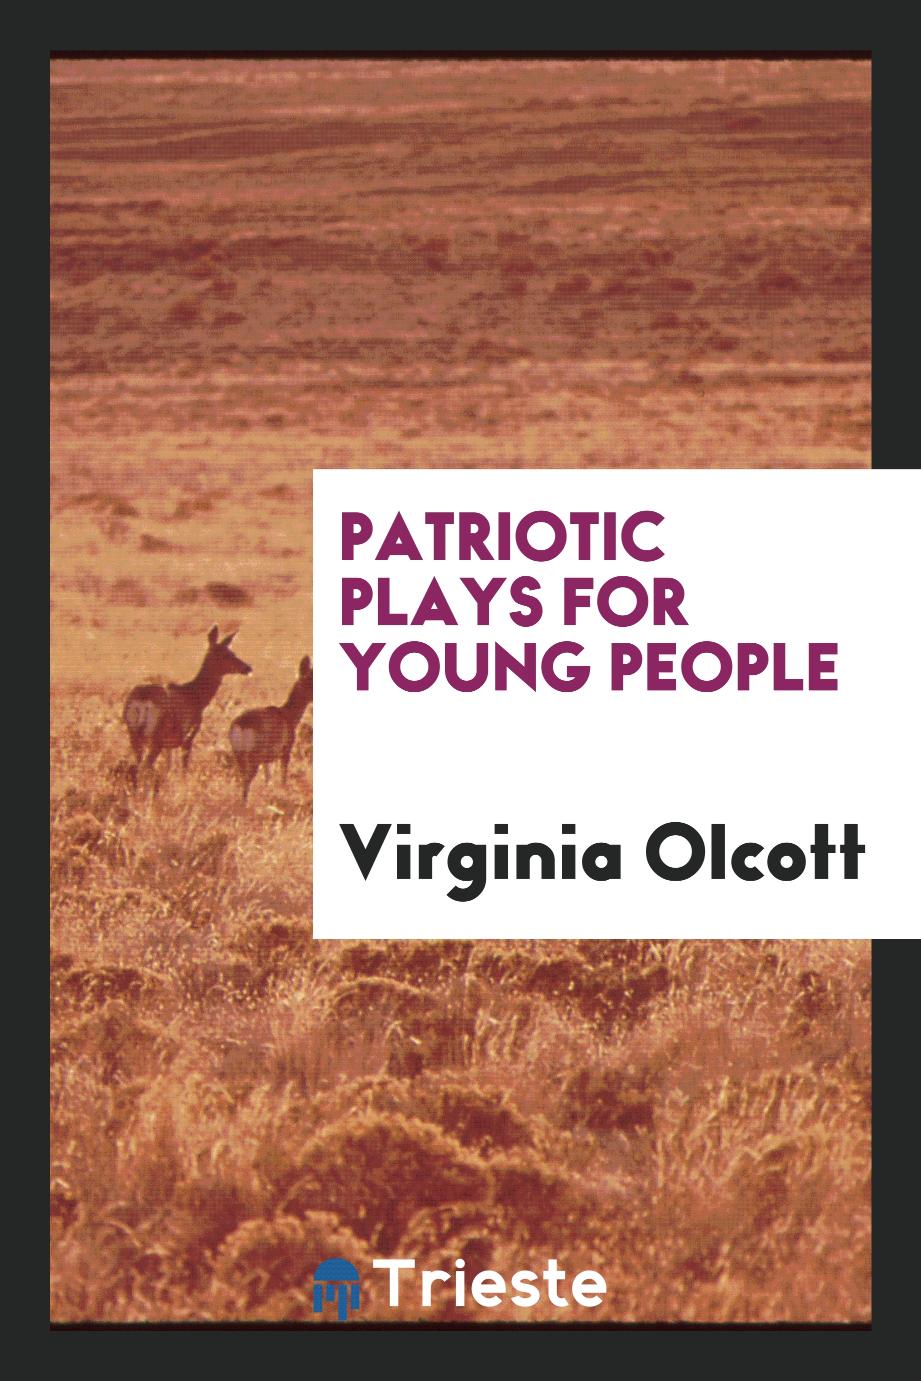 Patriotic plays for young people